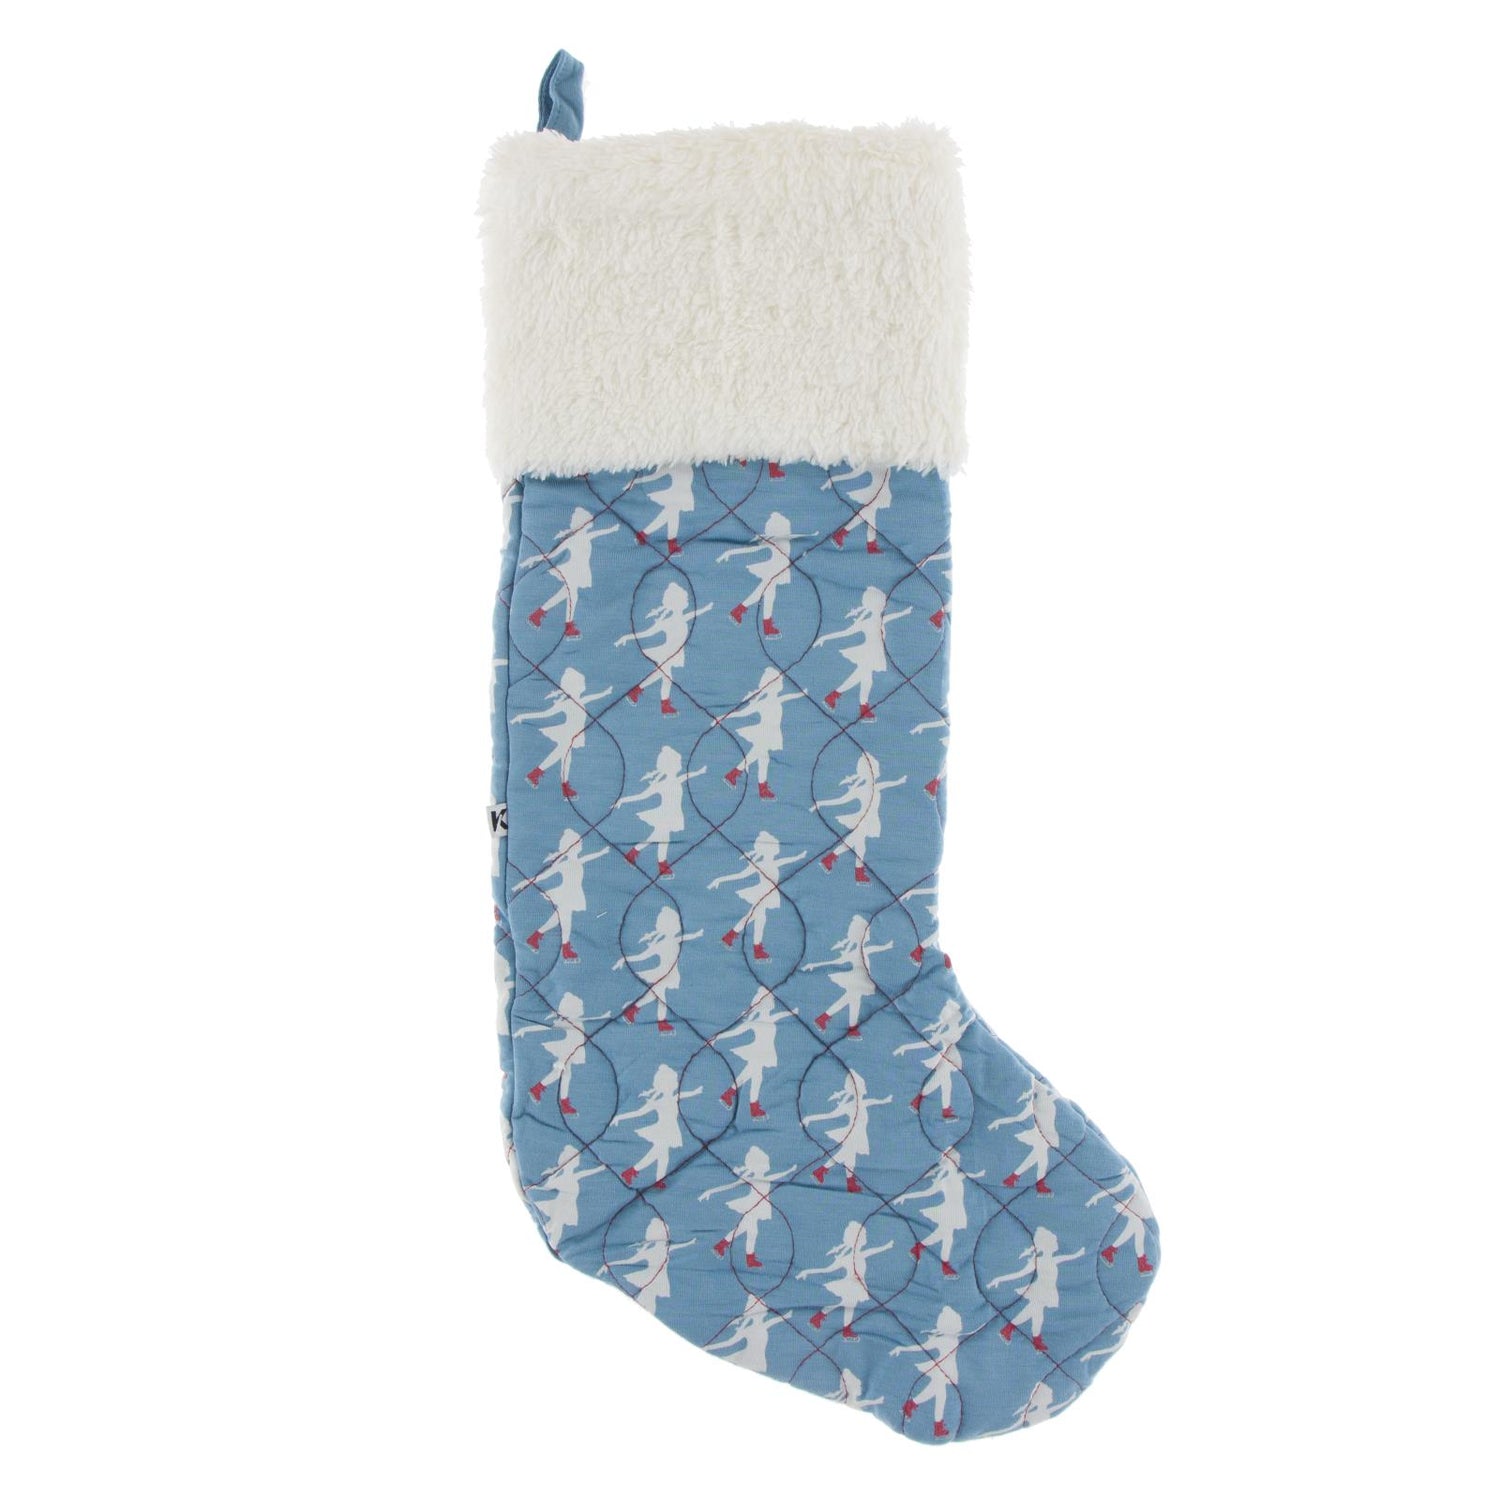 Print Quilted Stocking in Blue Moon Ice Skater/Crimson